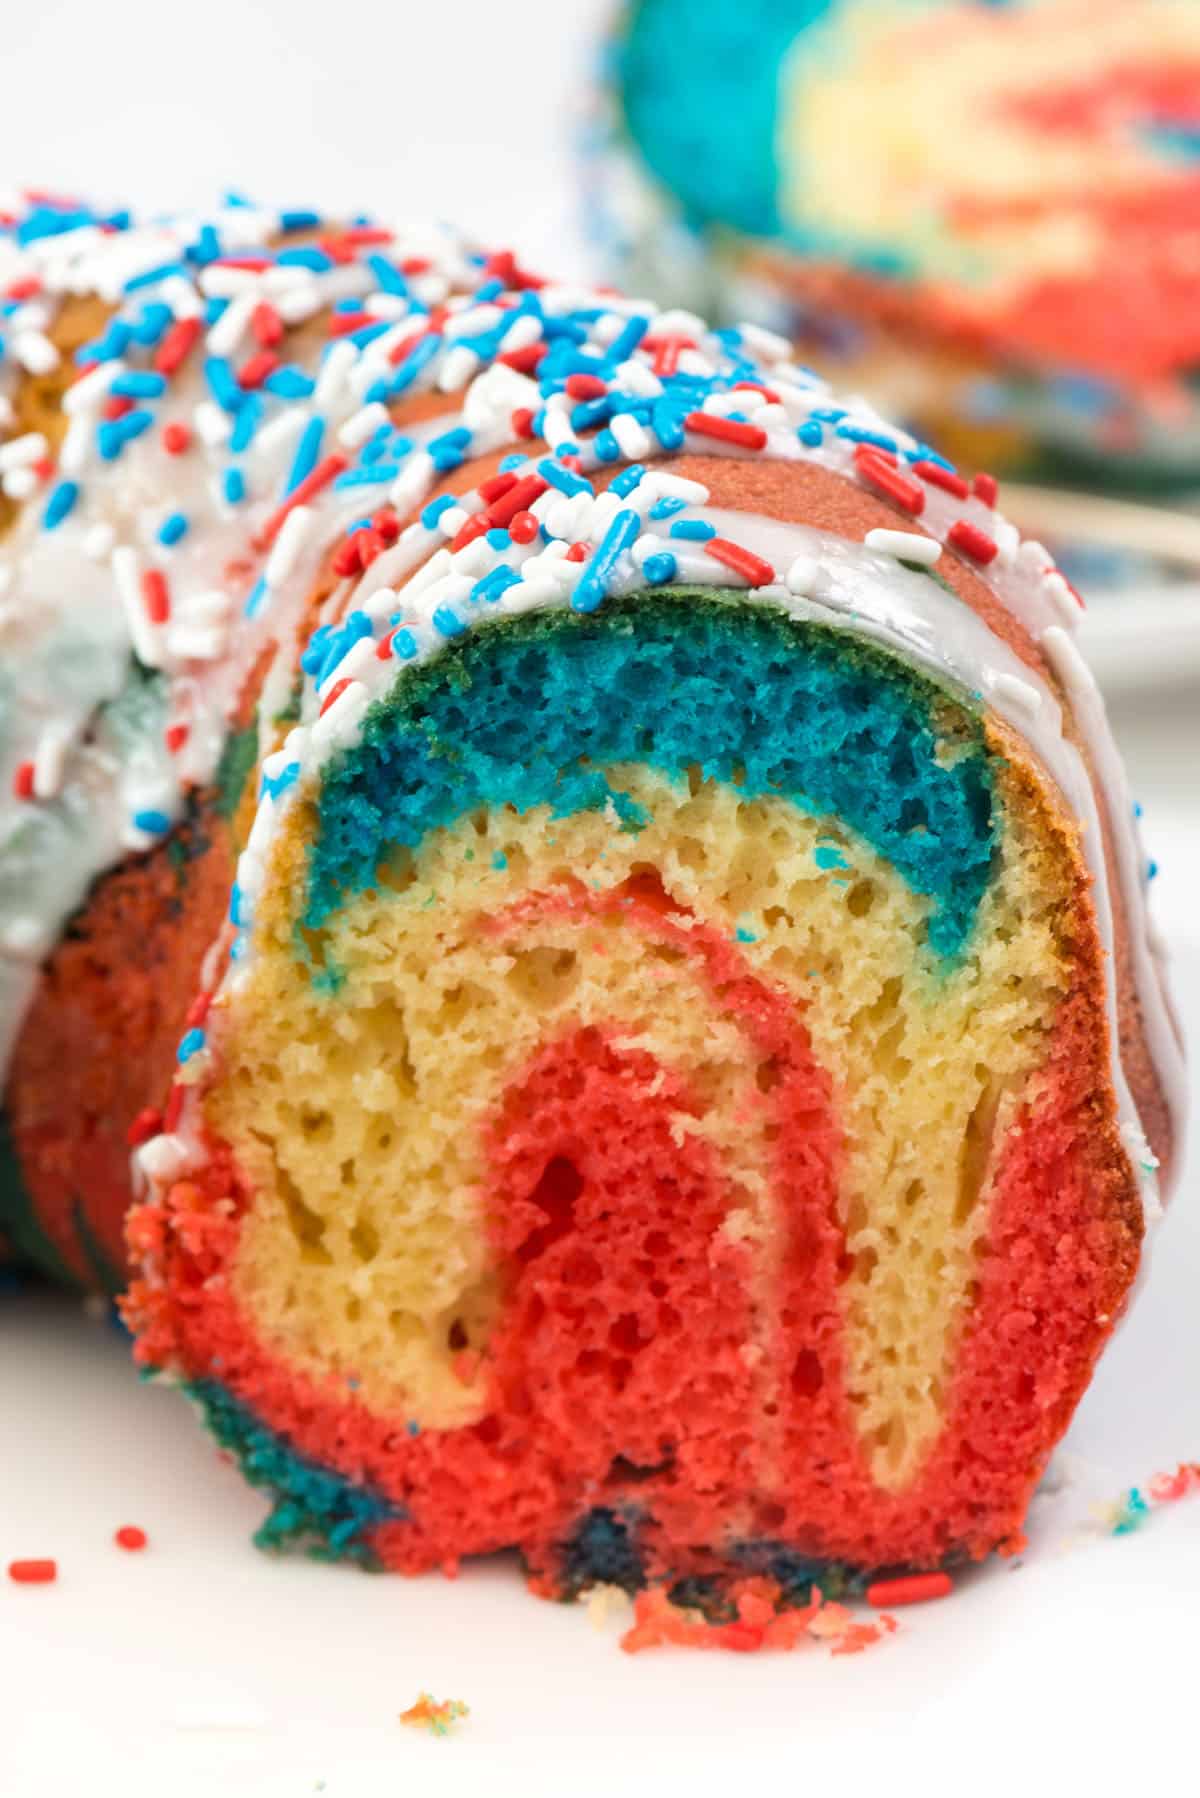 red and blue swirled bundt cake on a white plate.